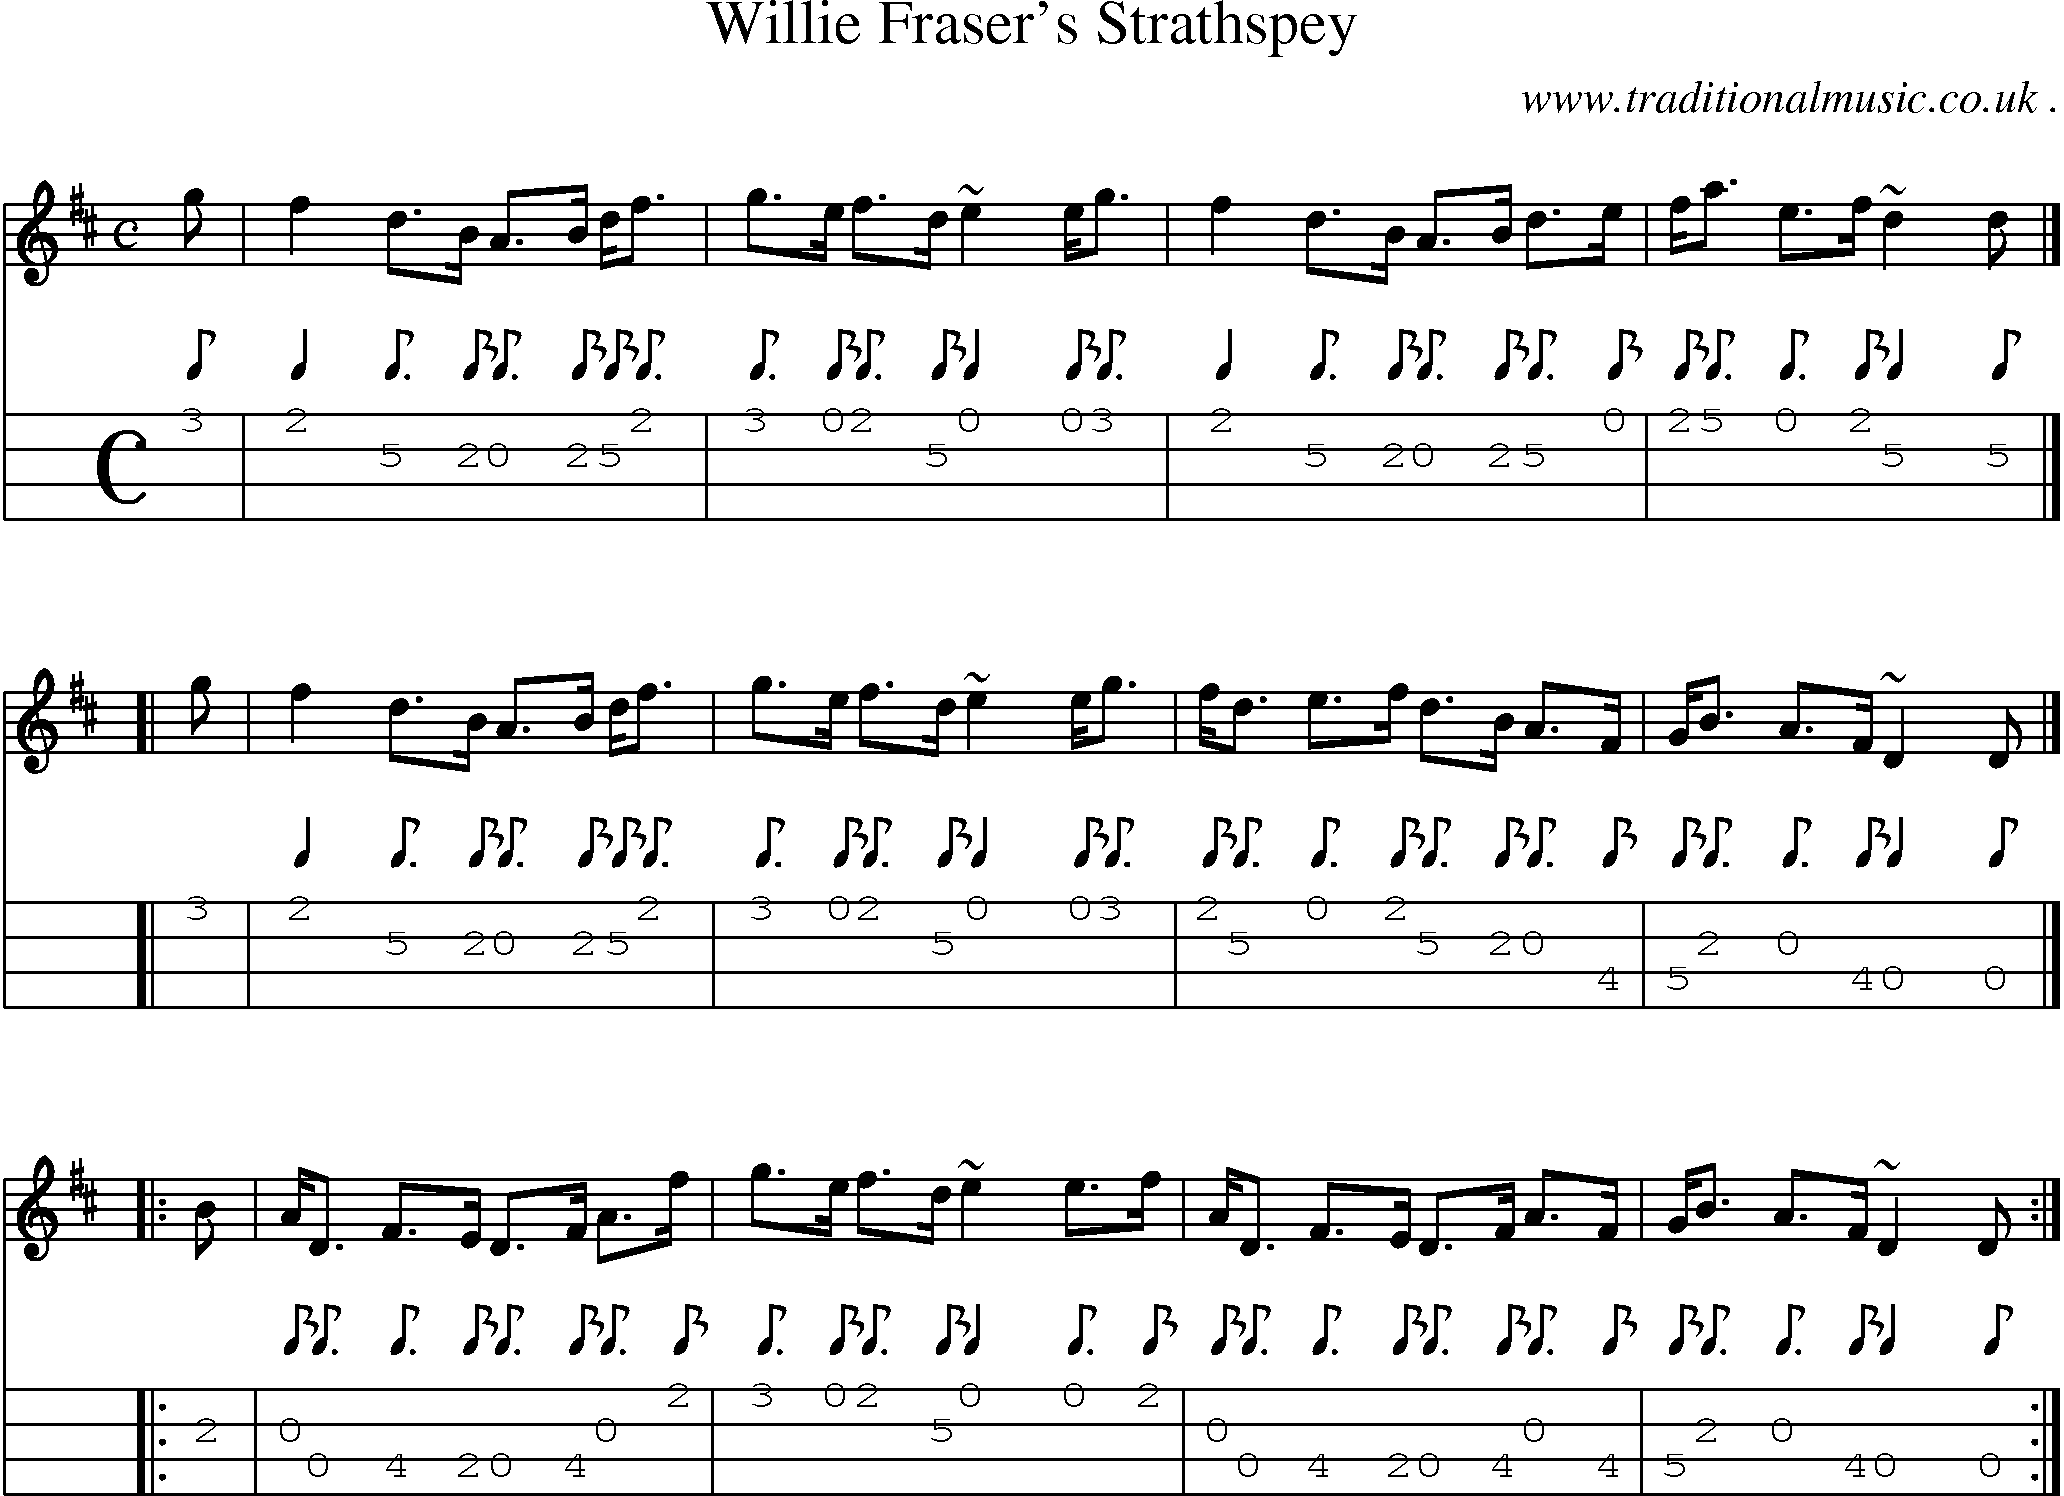 Sheet-music  score, Chords and Mandolin Tabs for Willie Frasers Strathspey